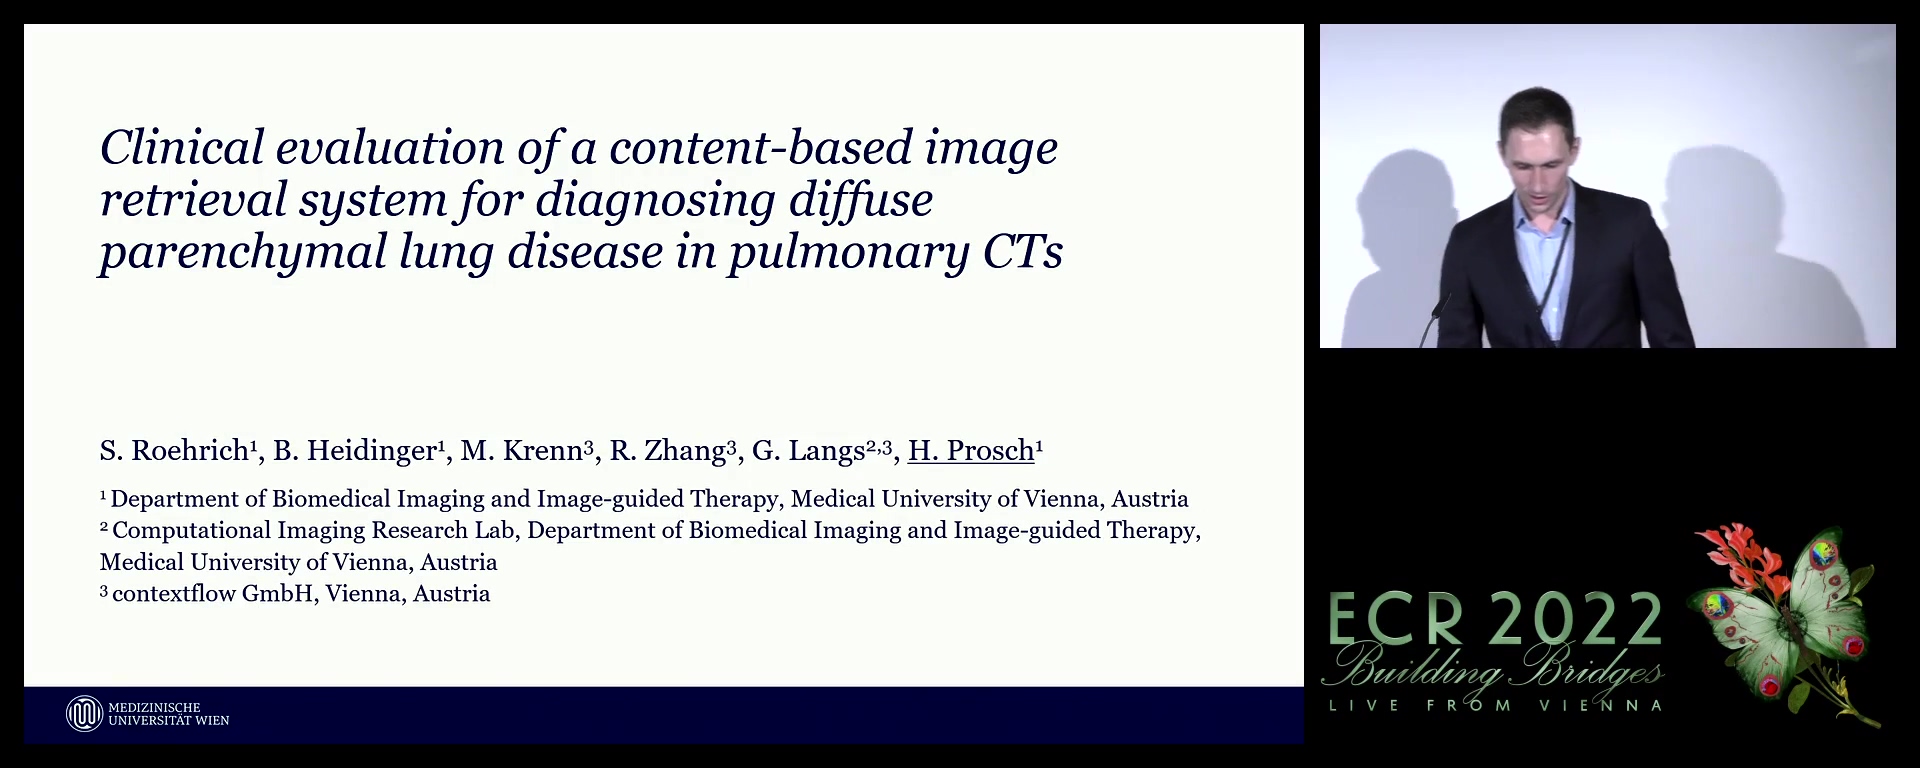 Impact of a content-based image retrieval system on the interpretation of chest CTs of patients with diffuse parenchymal lung disease